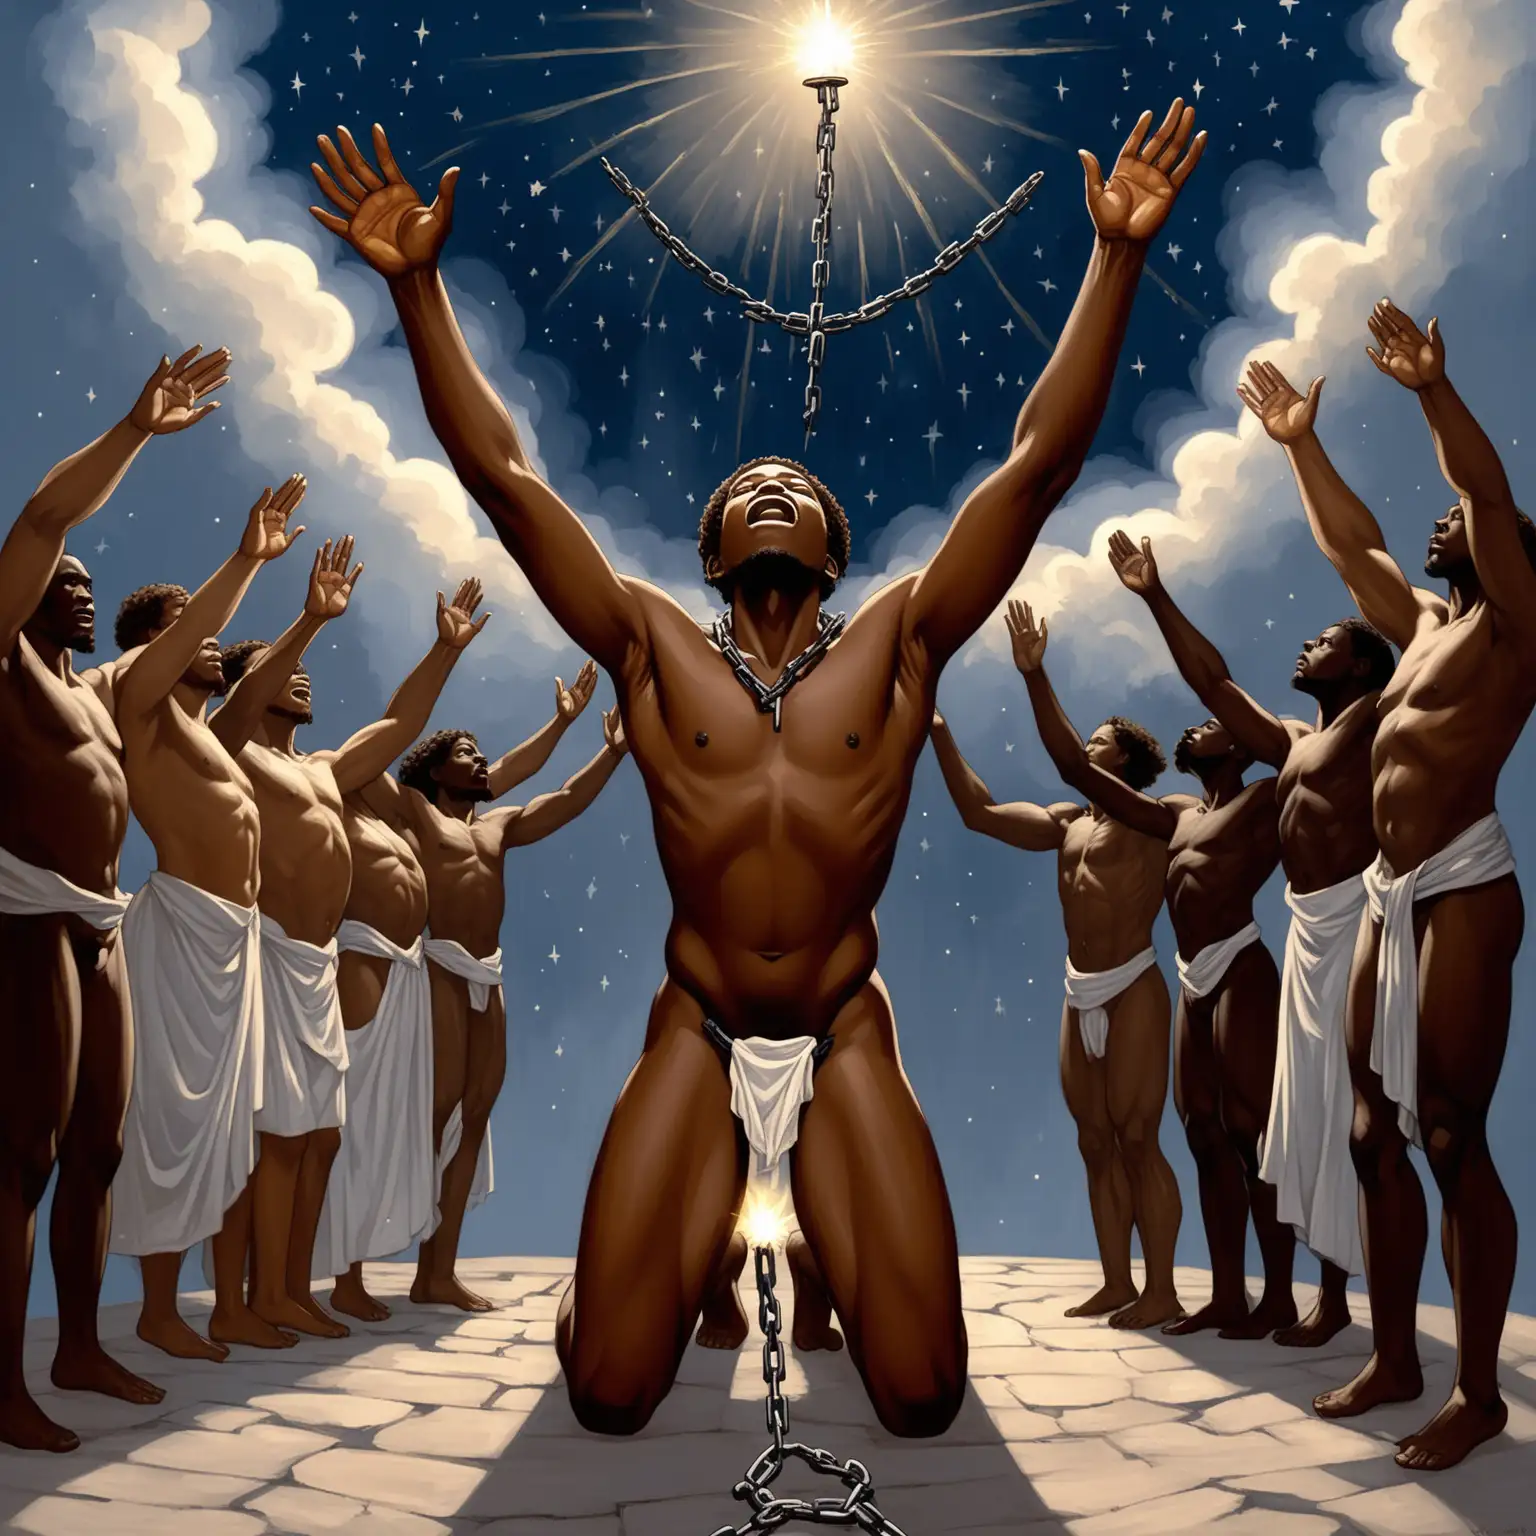 Create a painting of Black male slave in the 1800s semi nude on his knees, looking up with arms spread to sky with broken chains around his hands giving praise with light from sky on his body down on Juneteenth night, celebrating his freedom and acknowledgment of his ancestors.